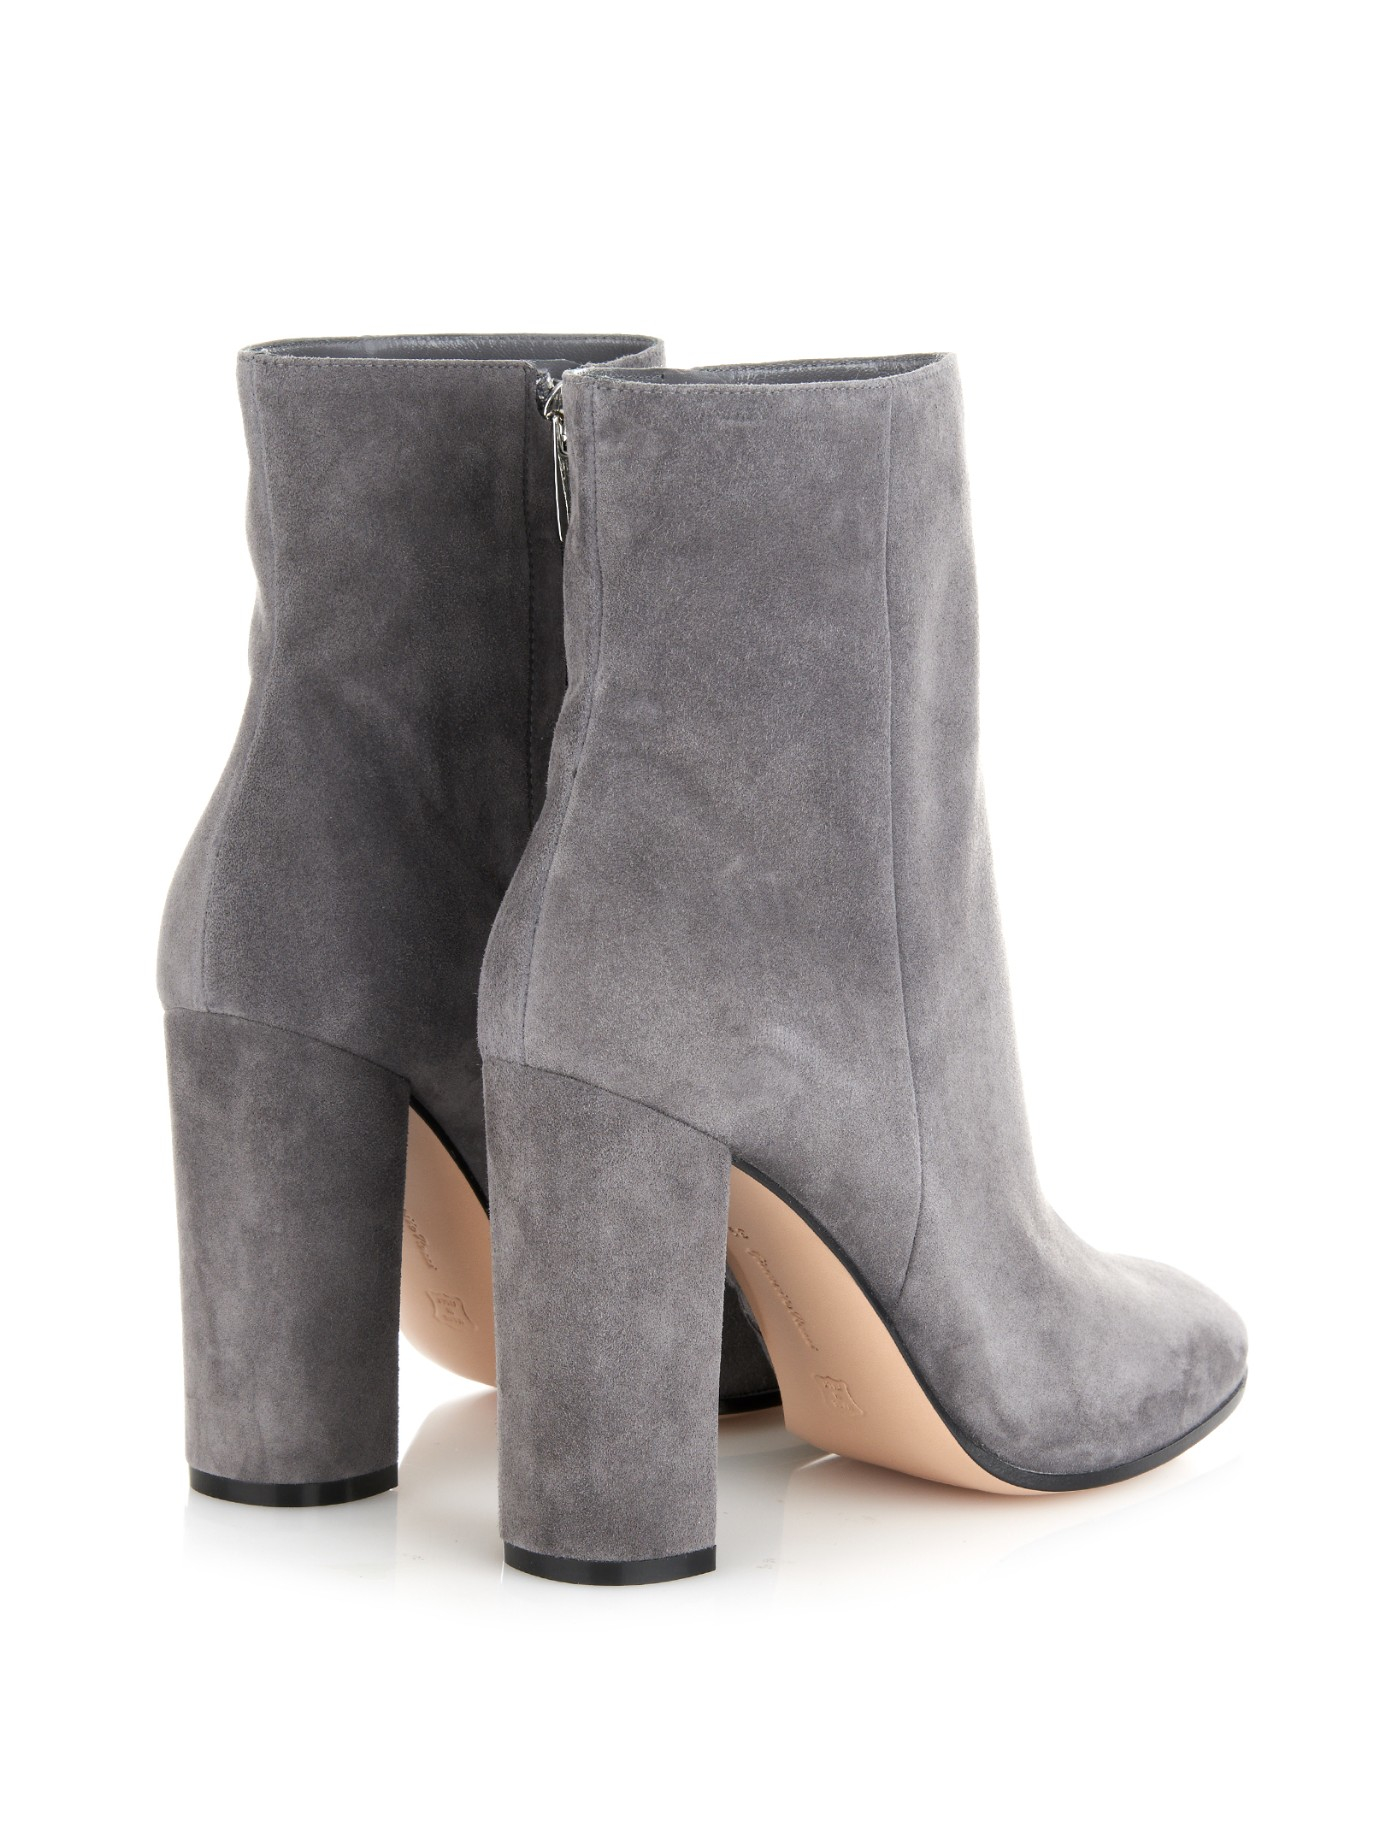 Gianvito Rossi Rolling Suede Ankle Boots in Dark Grey (Grey) - Lyst